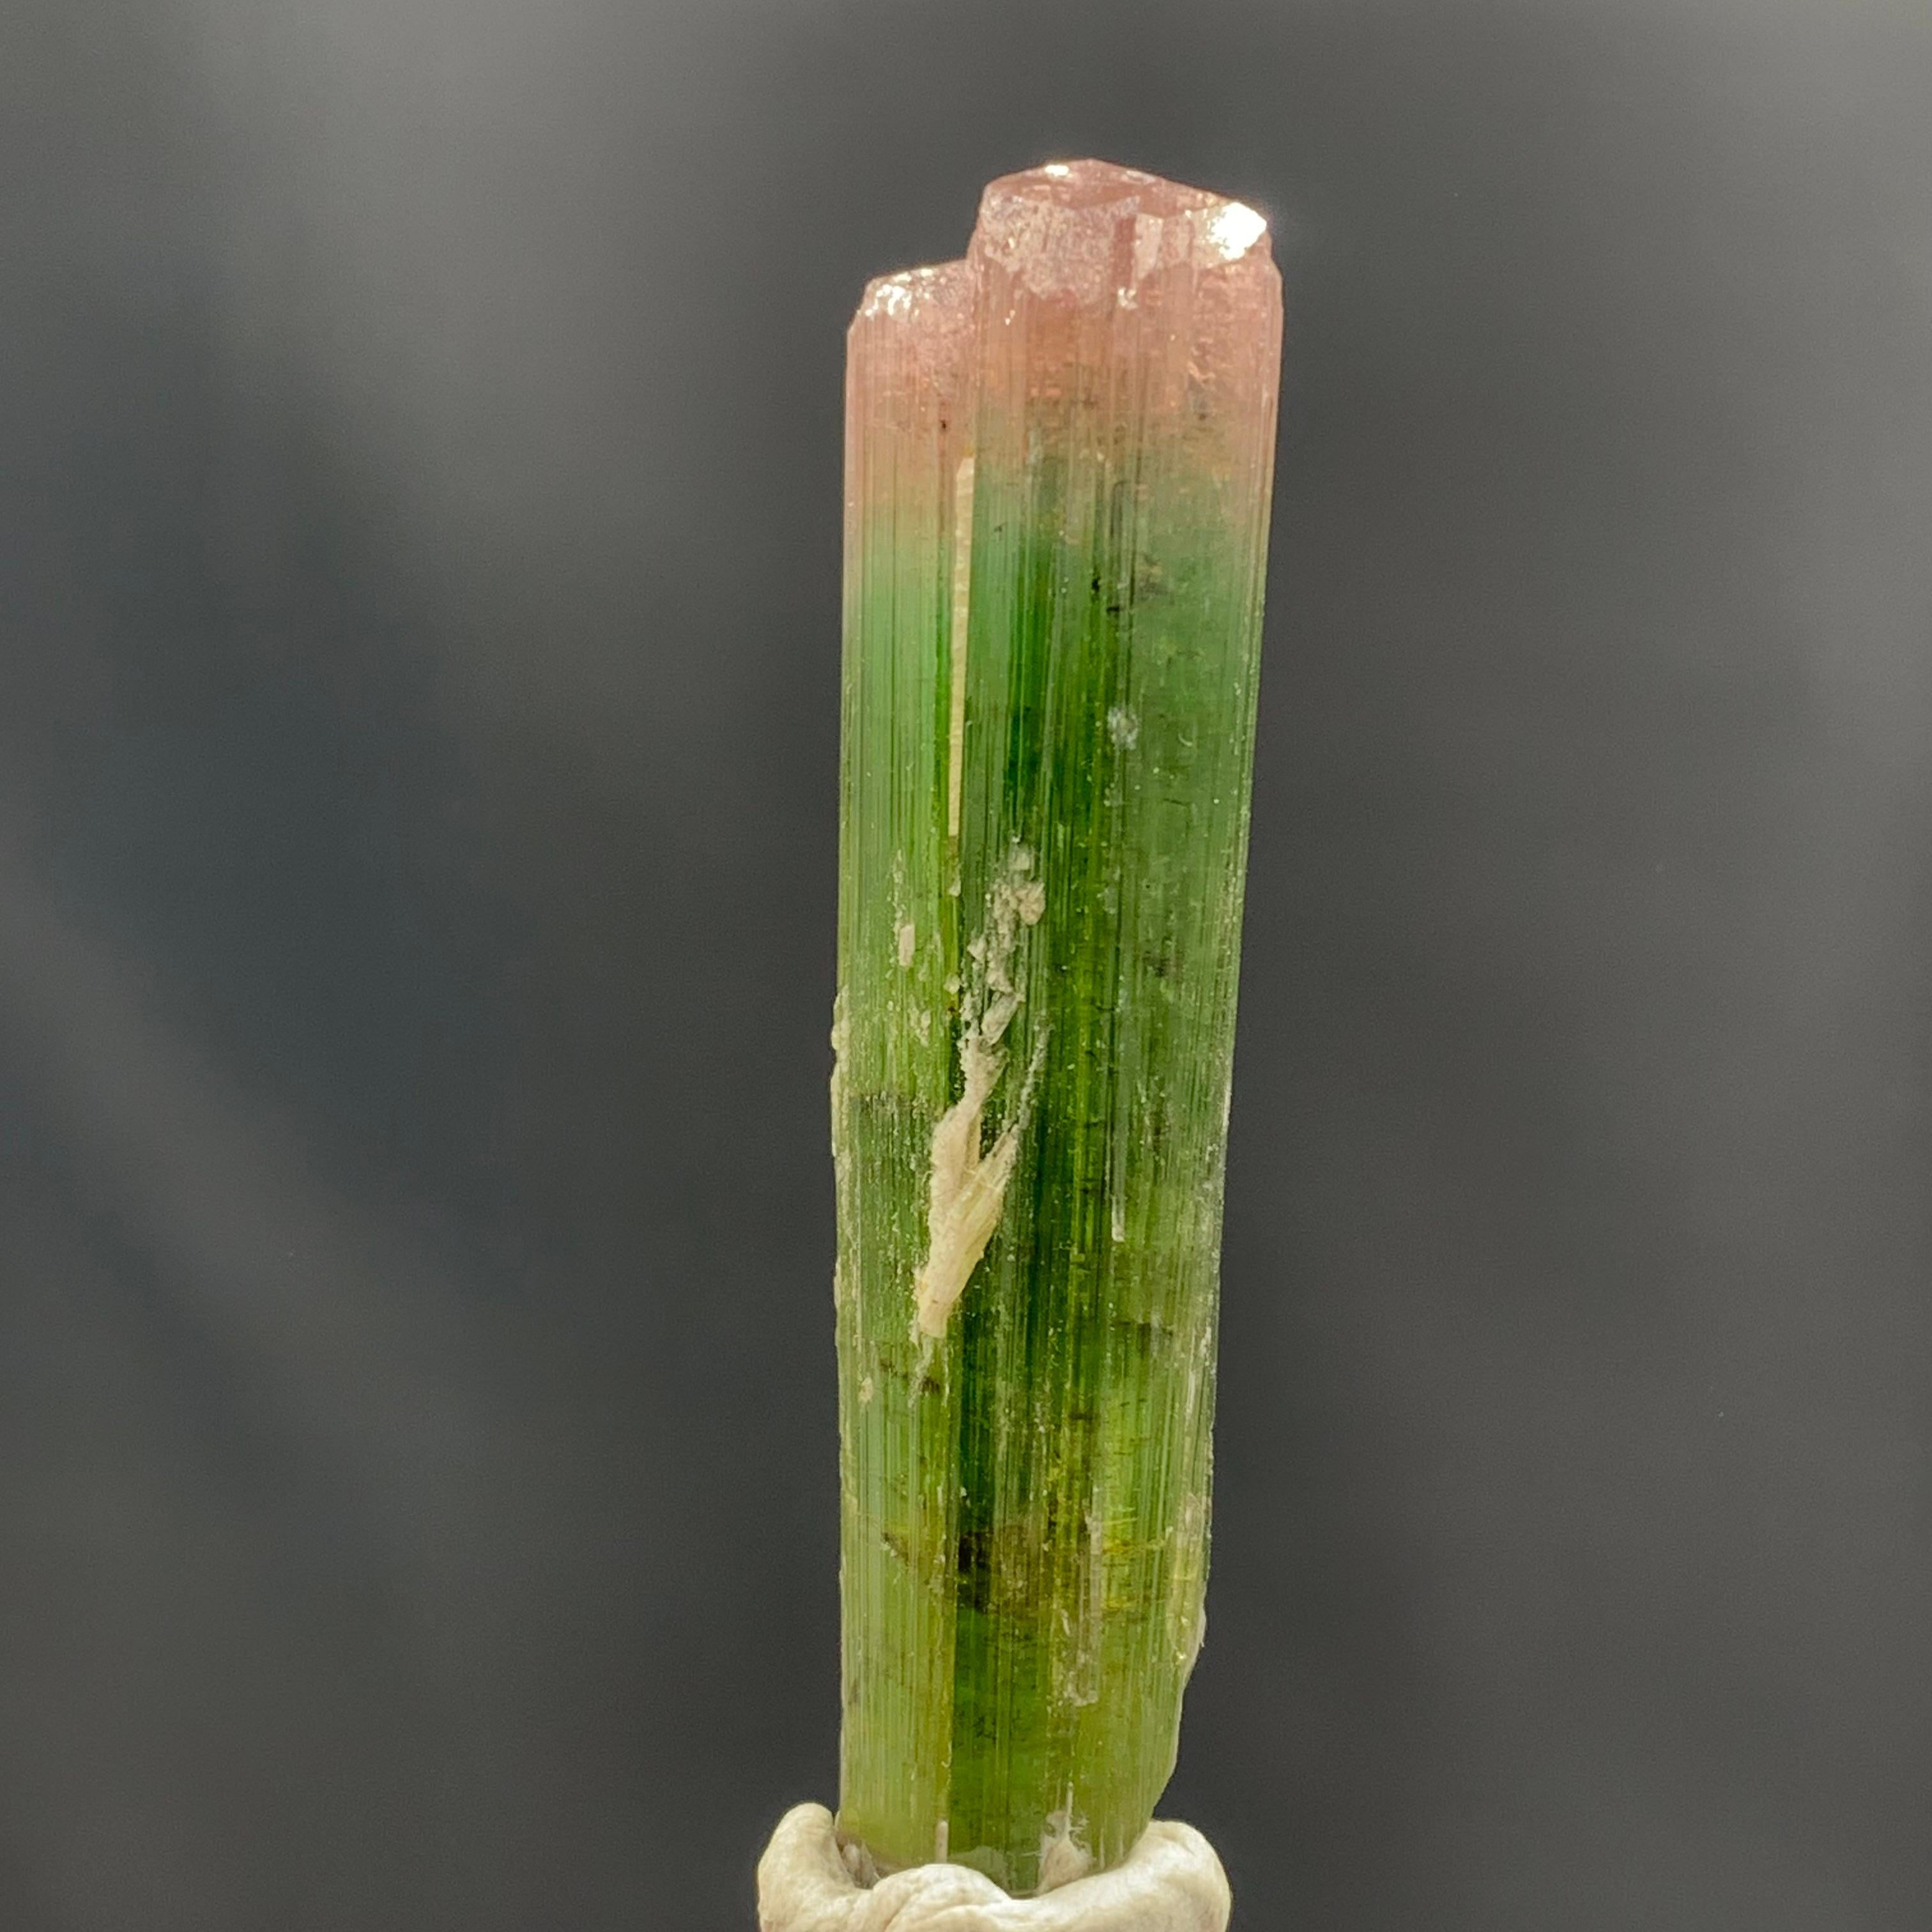 Glamorous Natural Bi Color Tourmaline Crystal From Afghanistan
WEIGHT: 69.75 Carat
DIMENSION: 5.0 x 1.3 x 1.1 Cm
ORIGIN : Paprok Mine, Afghanistan
COLOR: Pink And Green
TREATMENT: None
Tourmaline is an extremely popular gemstone; the name